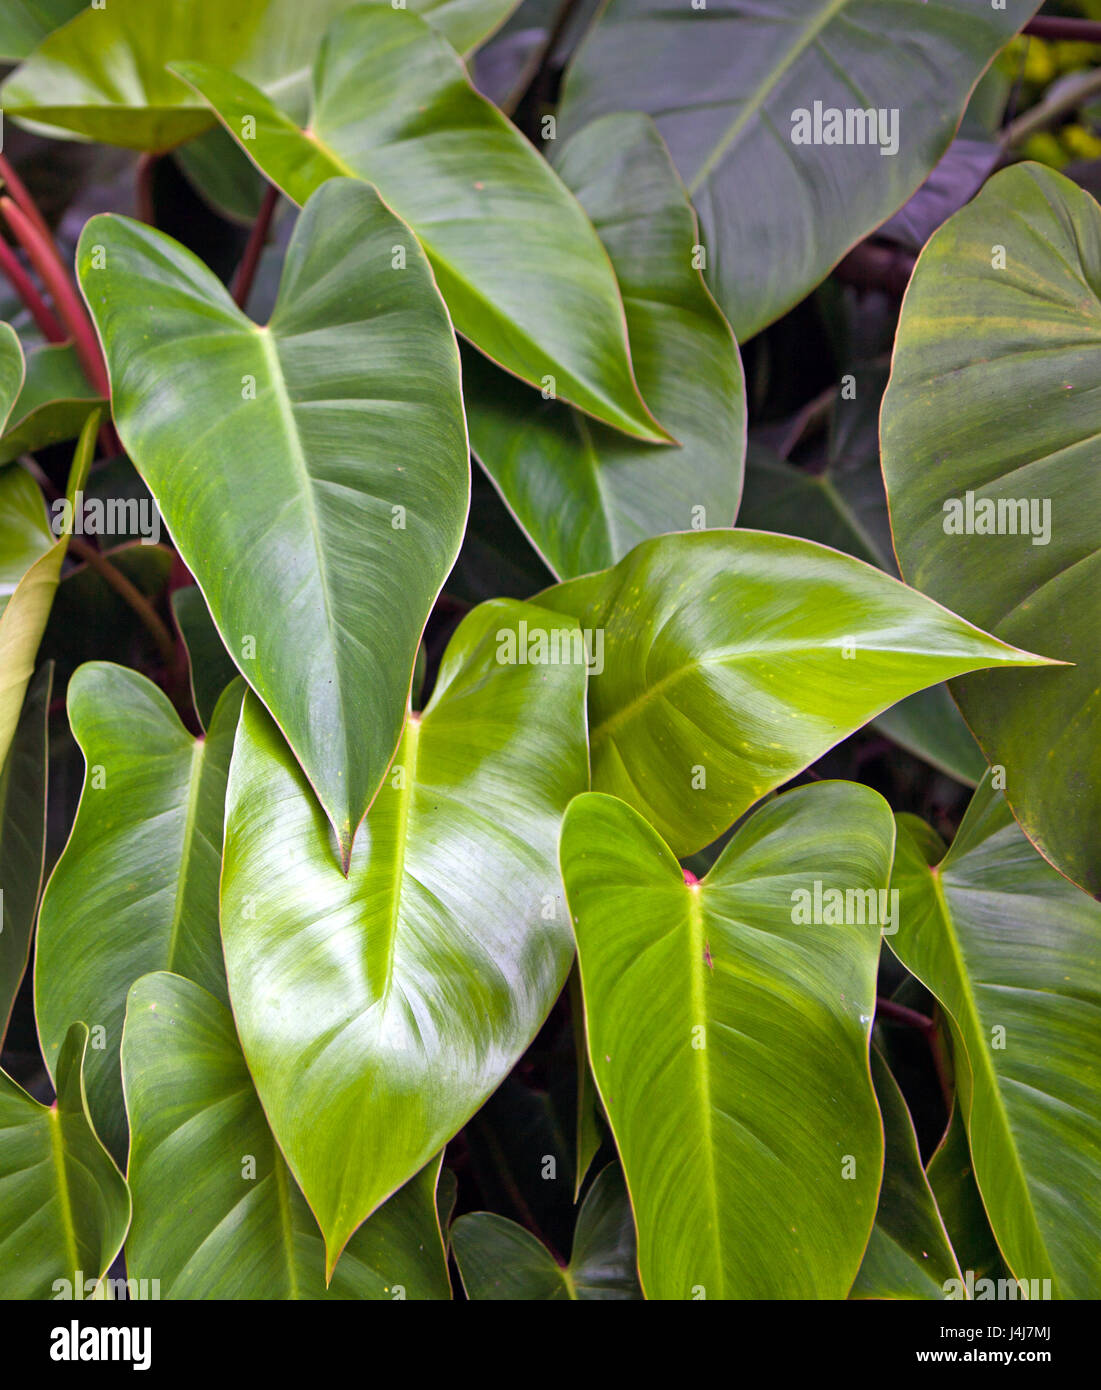 Red Emerald Philodendron, Philodendron Erubescens. Stockfoto